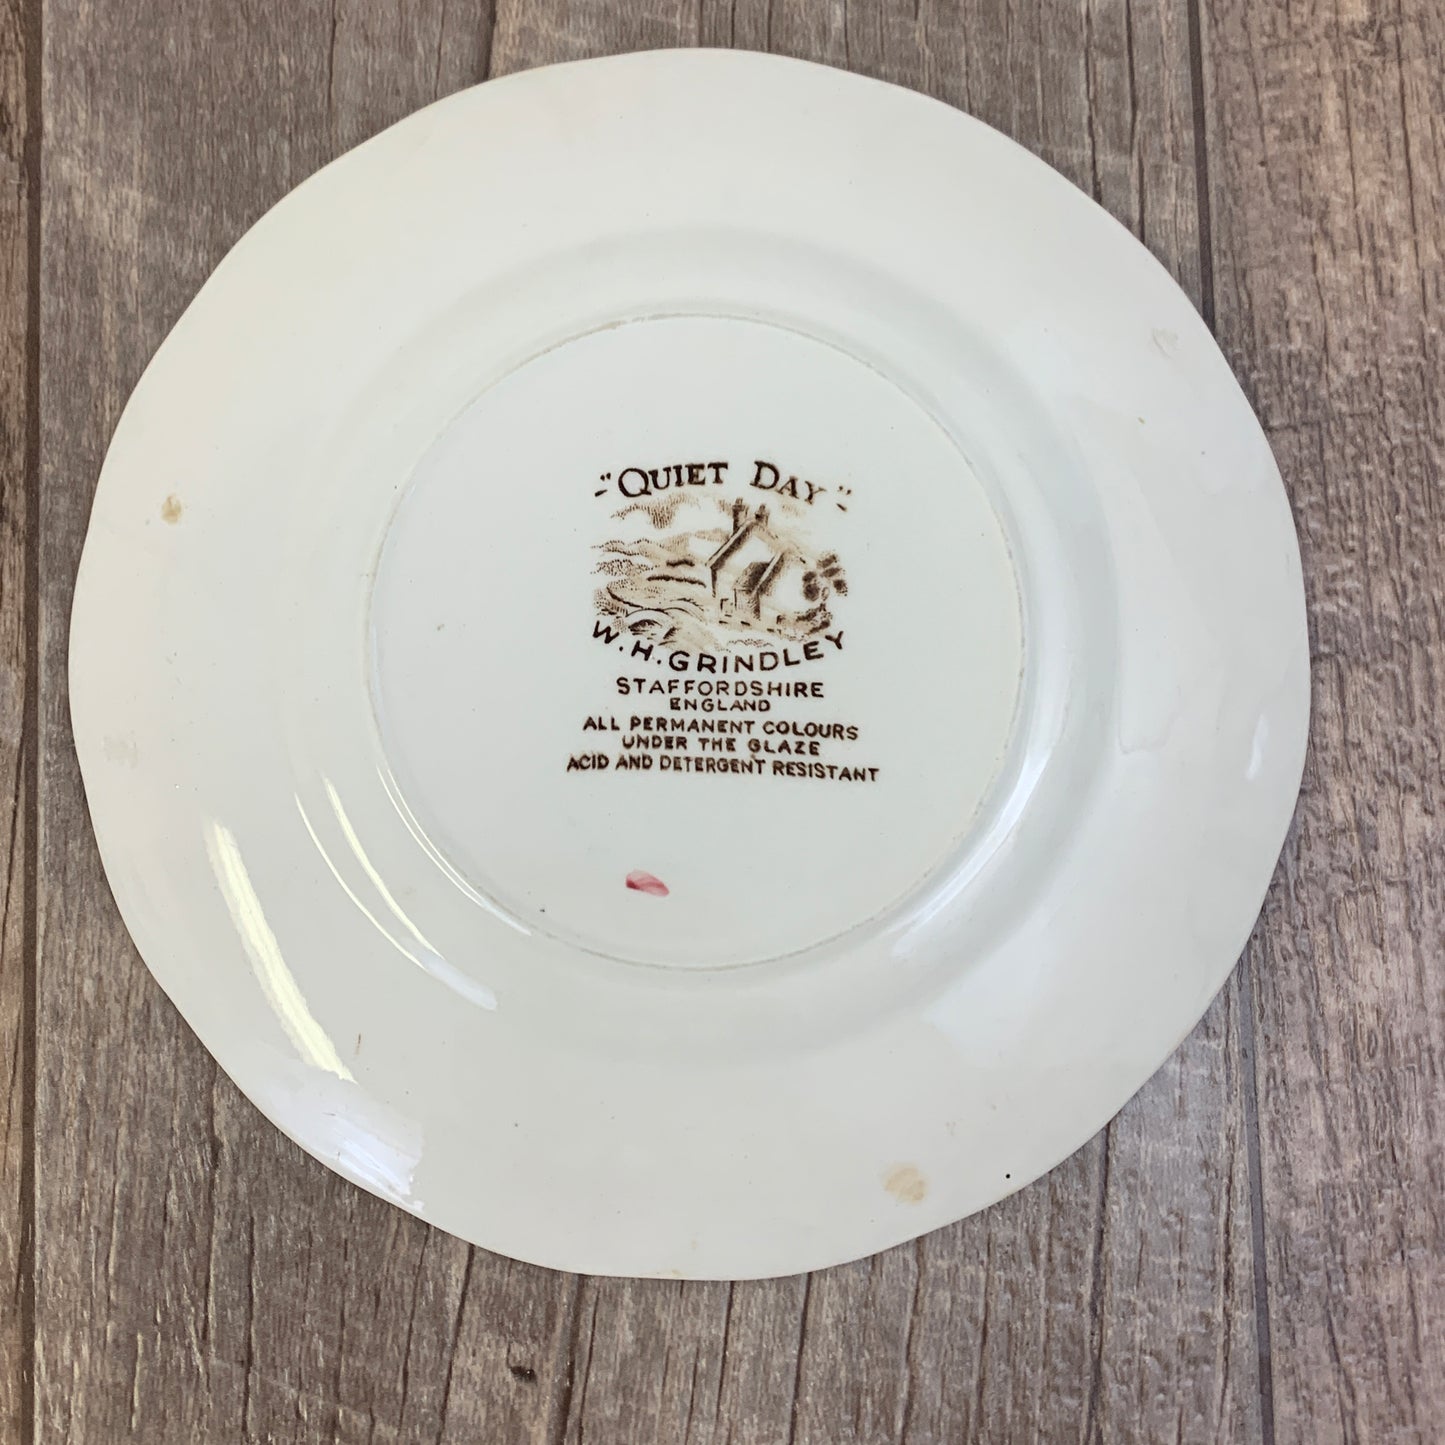 WH Grindley Transferware A Quiet Day Luncheon Plate 8.75” Antique Farmhouse Style Transferware Plate